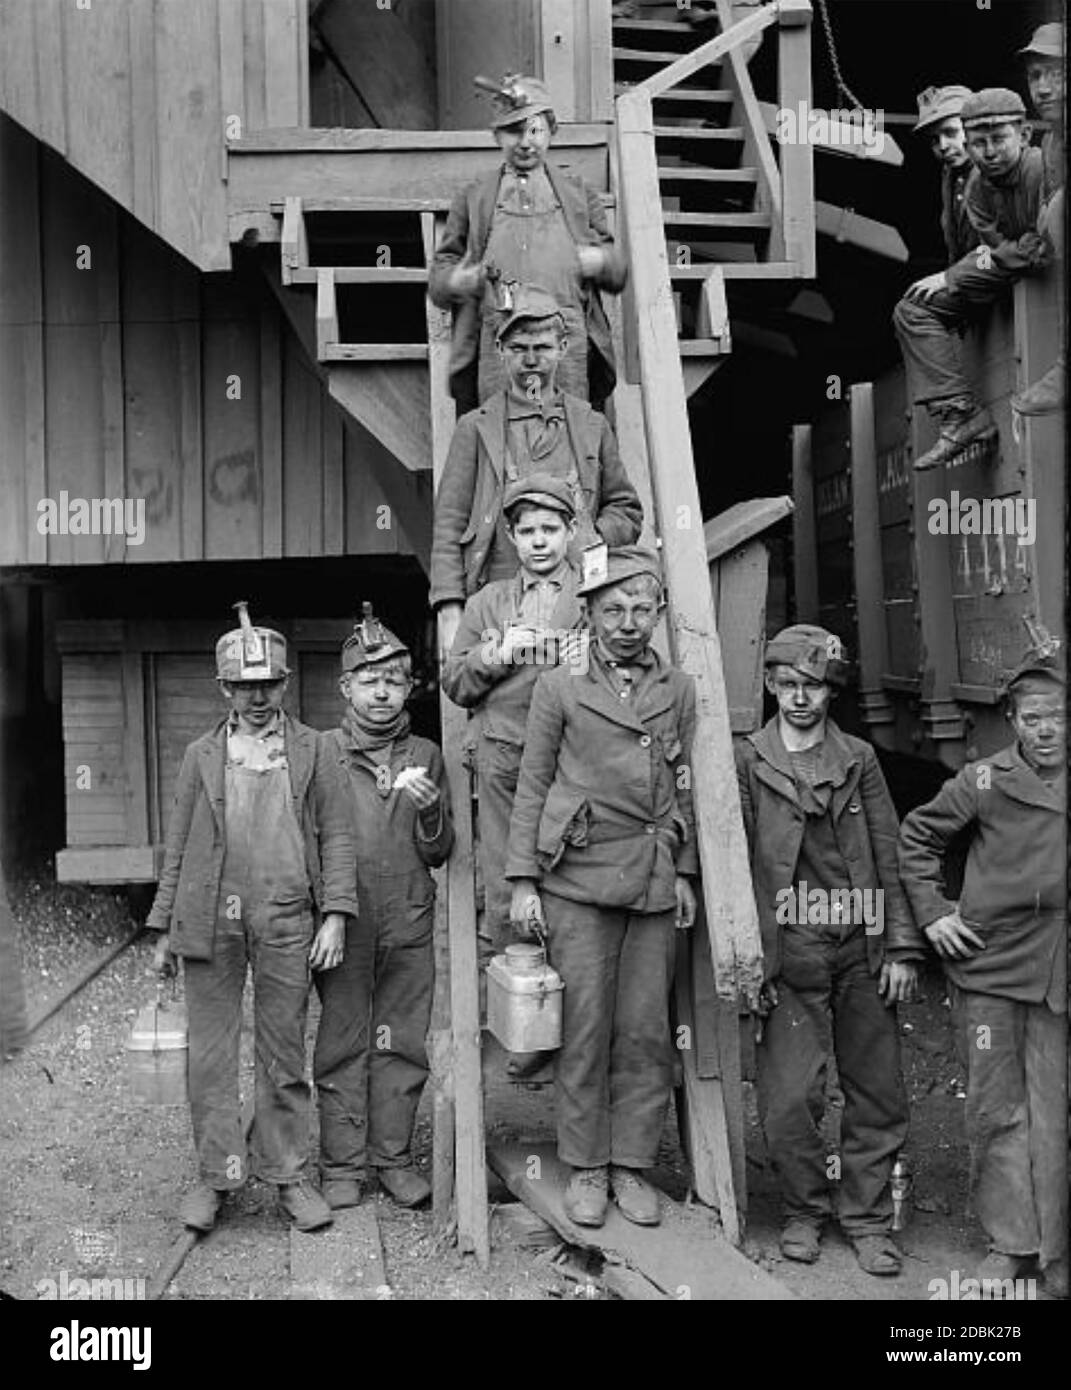 BREAKER BOYS at the Woodward Coal Mine, Kingston, Pennsylvania,  about 1900. The ones with headlamps are possibly mule drivers, those on the right the ones who actually sorted the coal. Photo: Lewis Hine Stock Photo